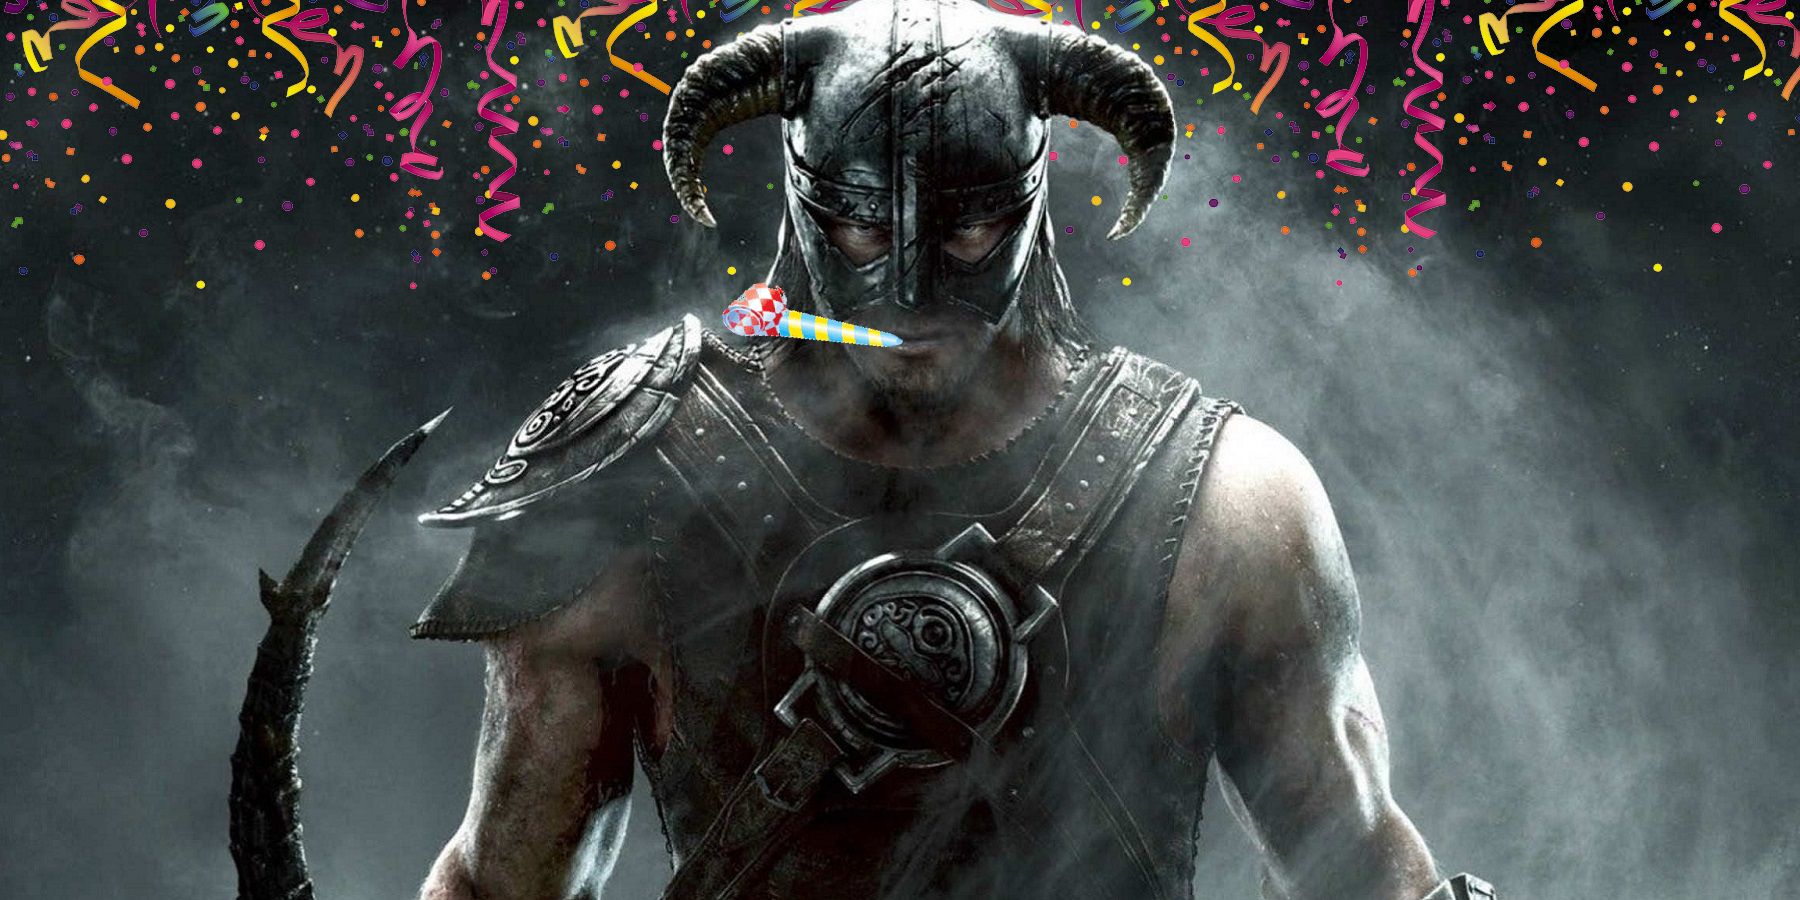 Image from Skyrim showing the Dragonbon blowing a party blower, with streamers behind them.